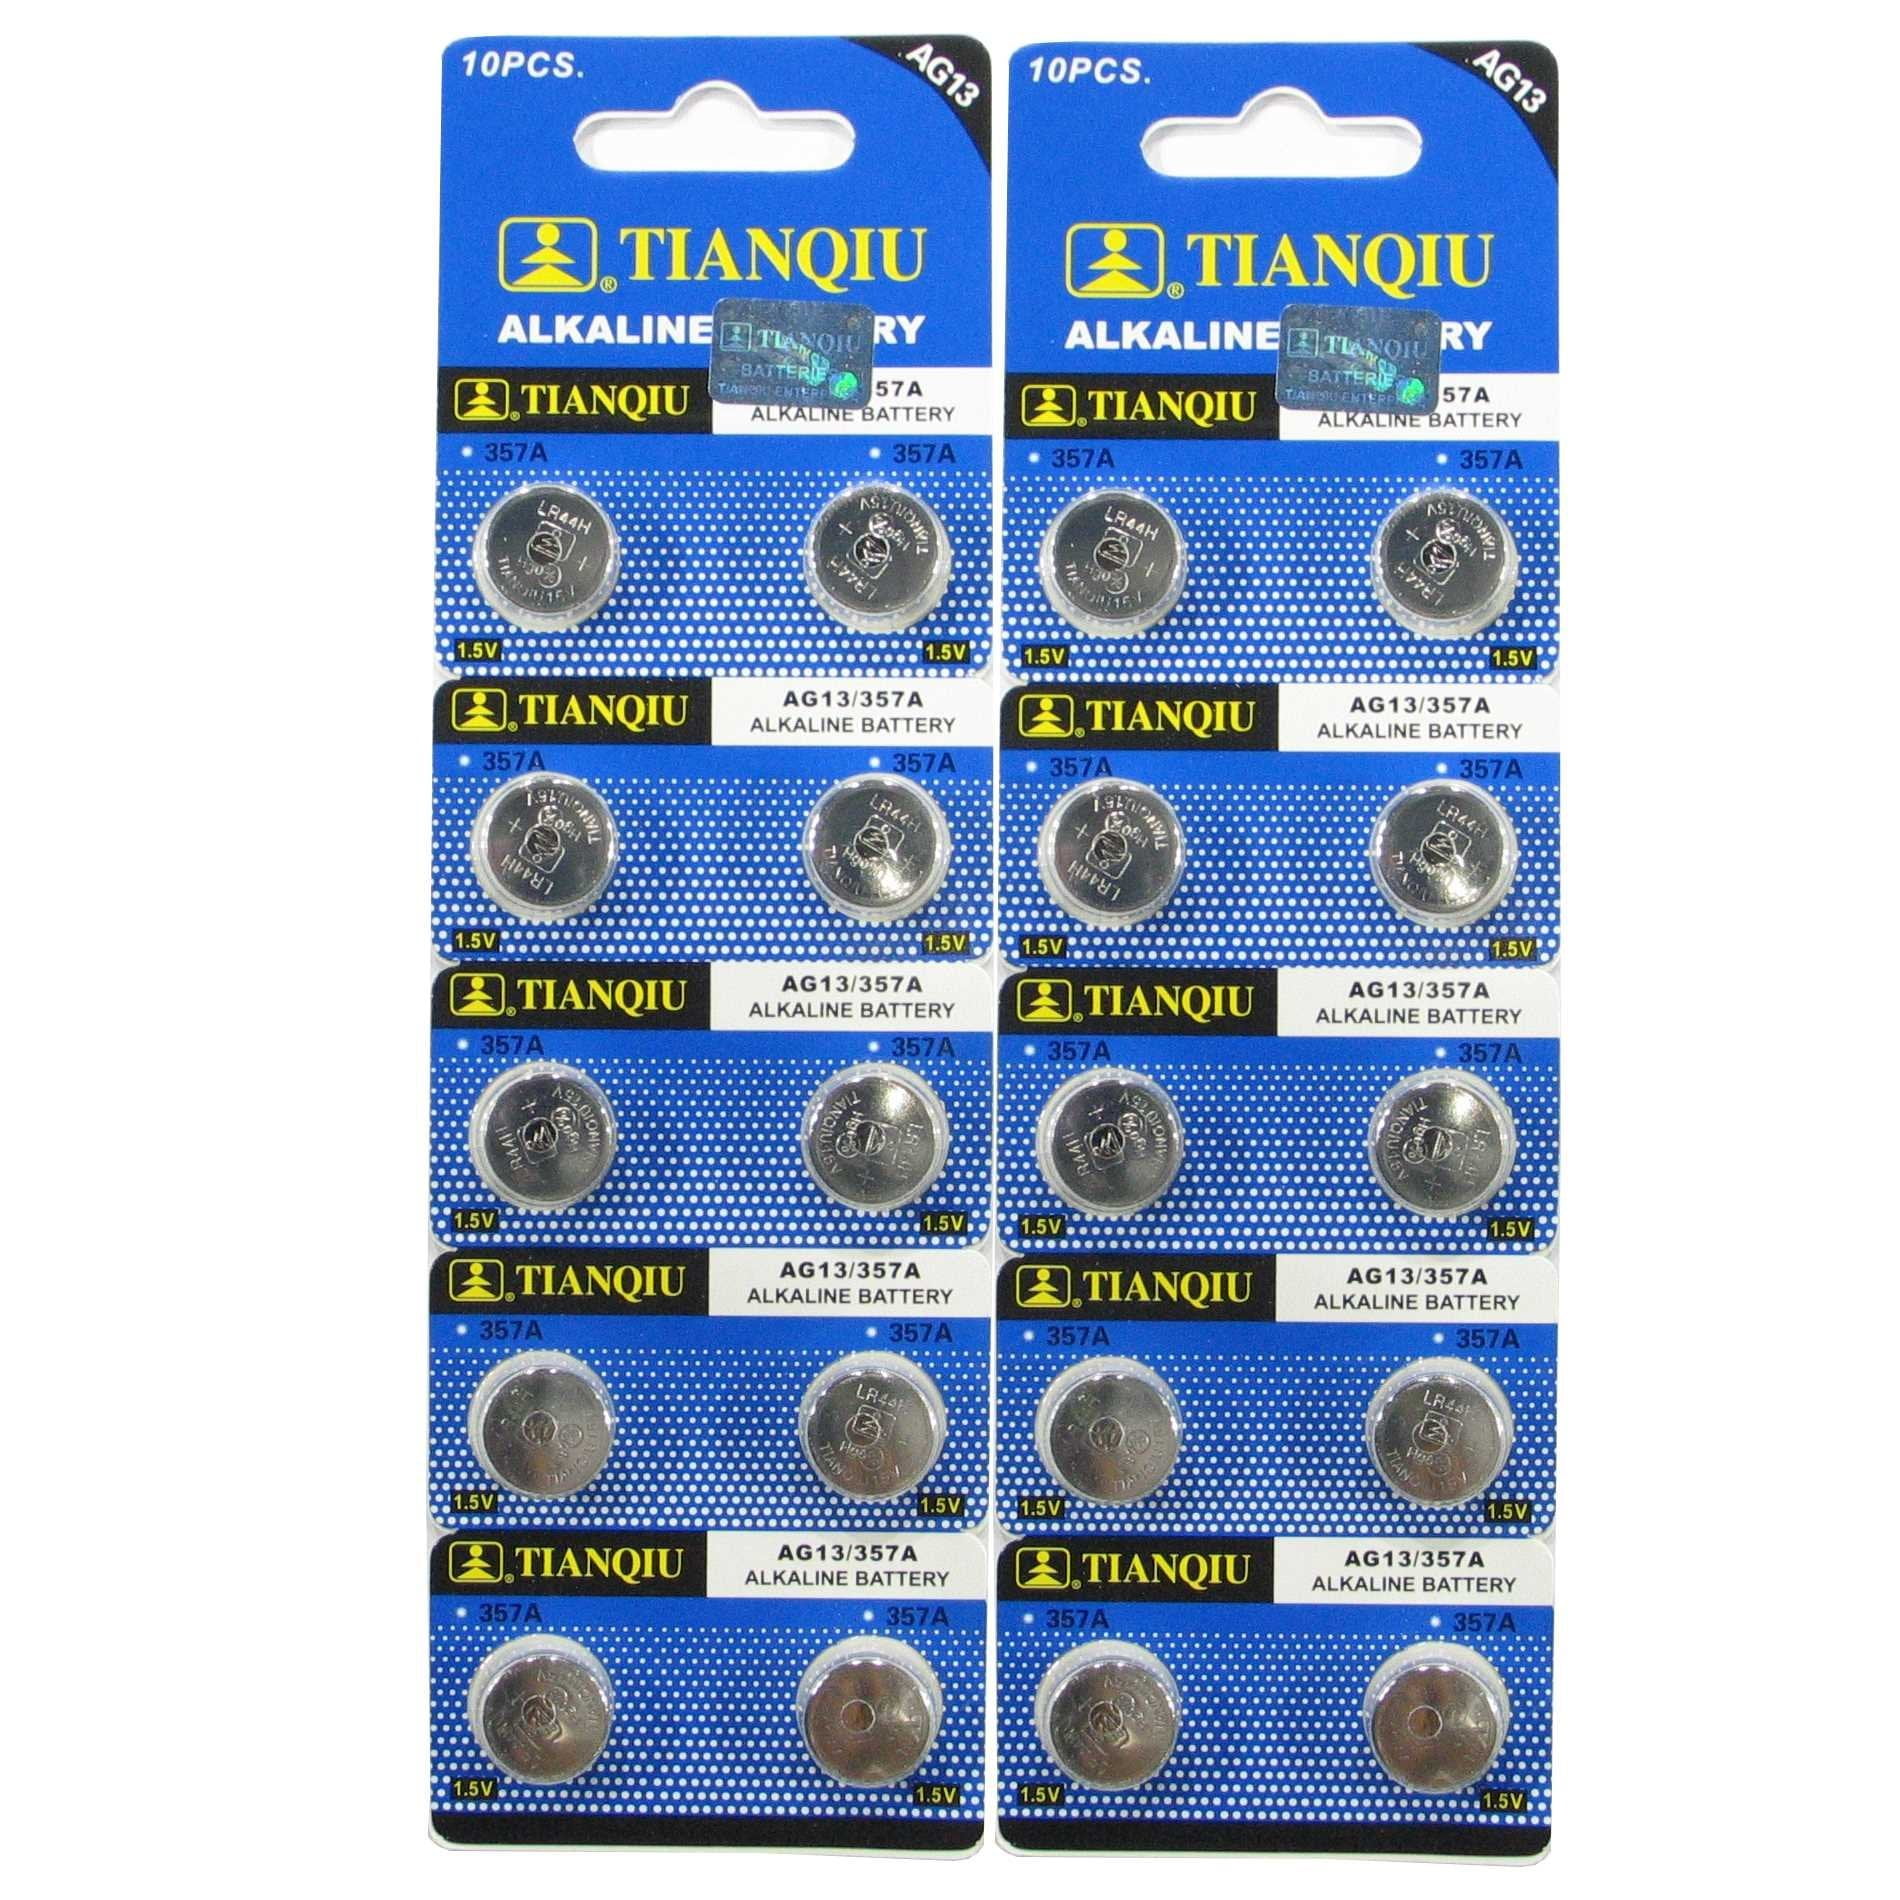 public equation delinquency Generic AG13/LR44 Alkaline Button Cell Battery - 20 Pack - Walmart.com